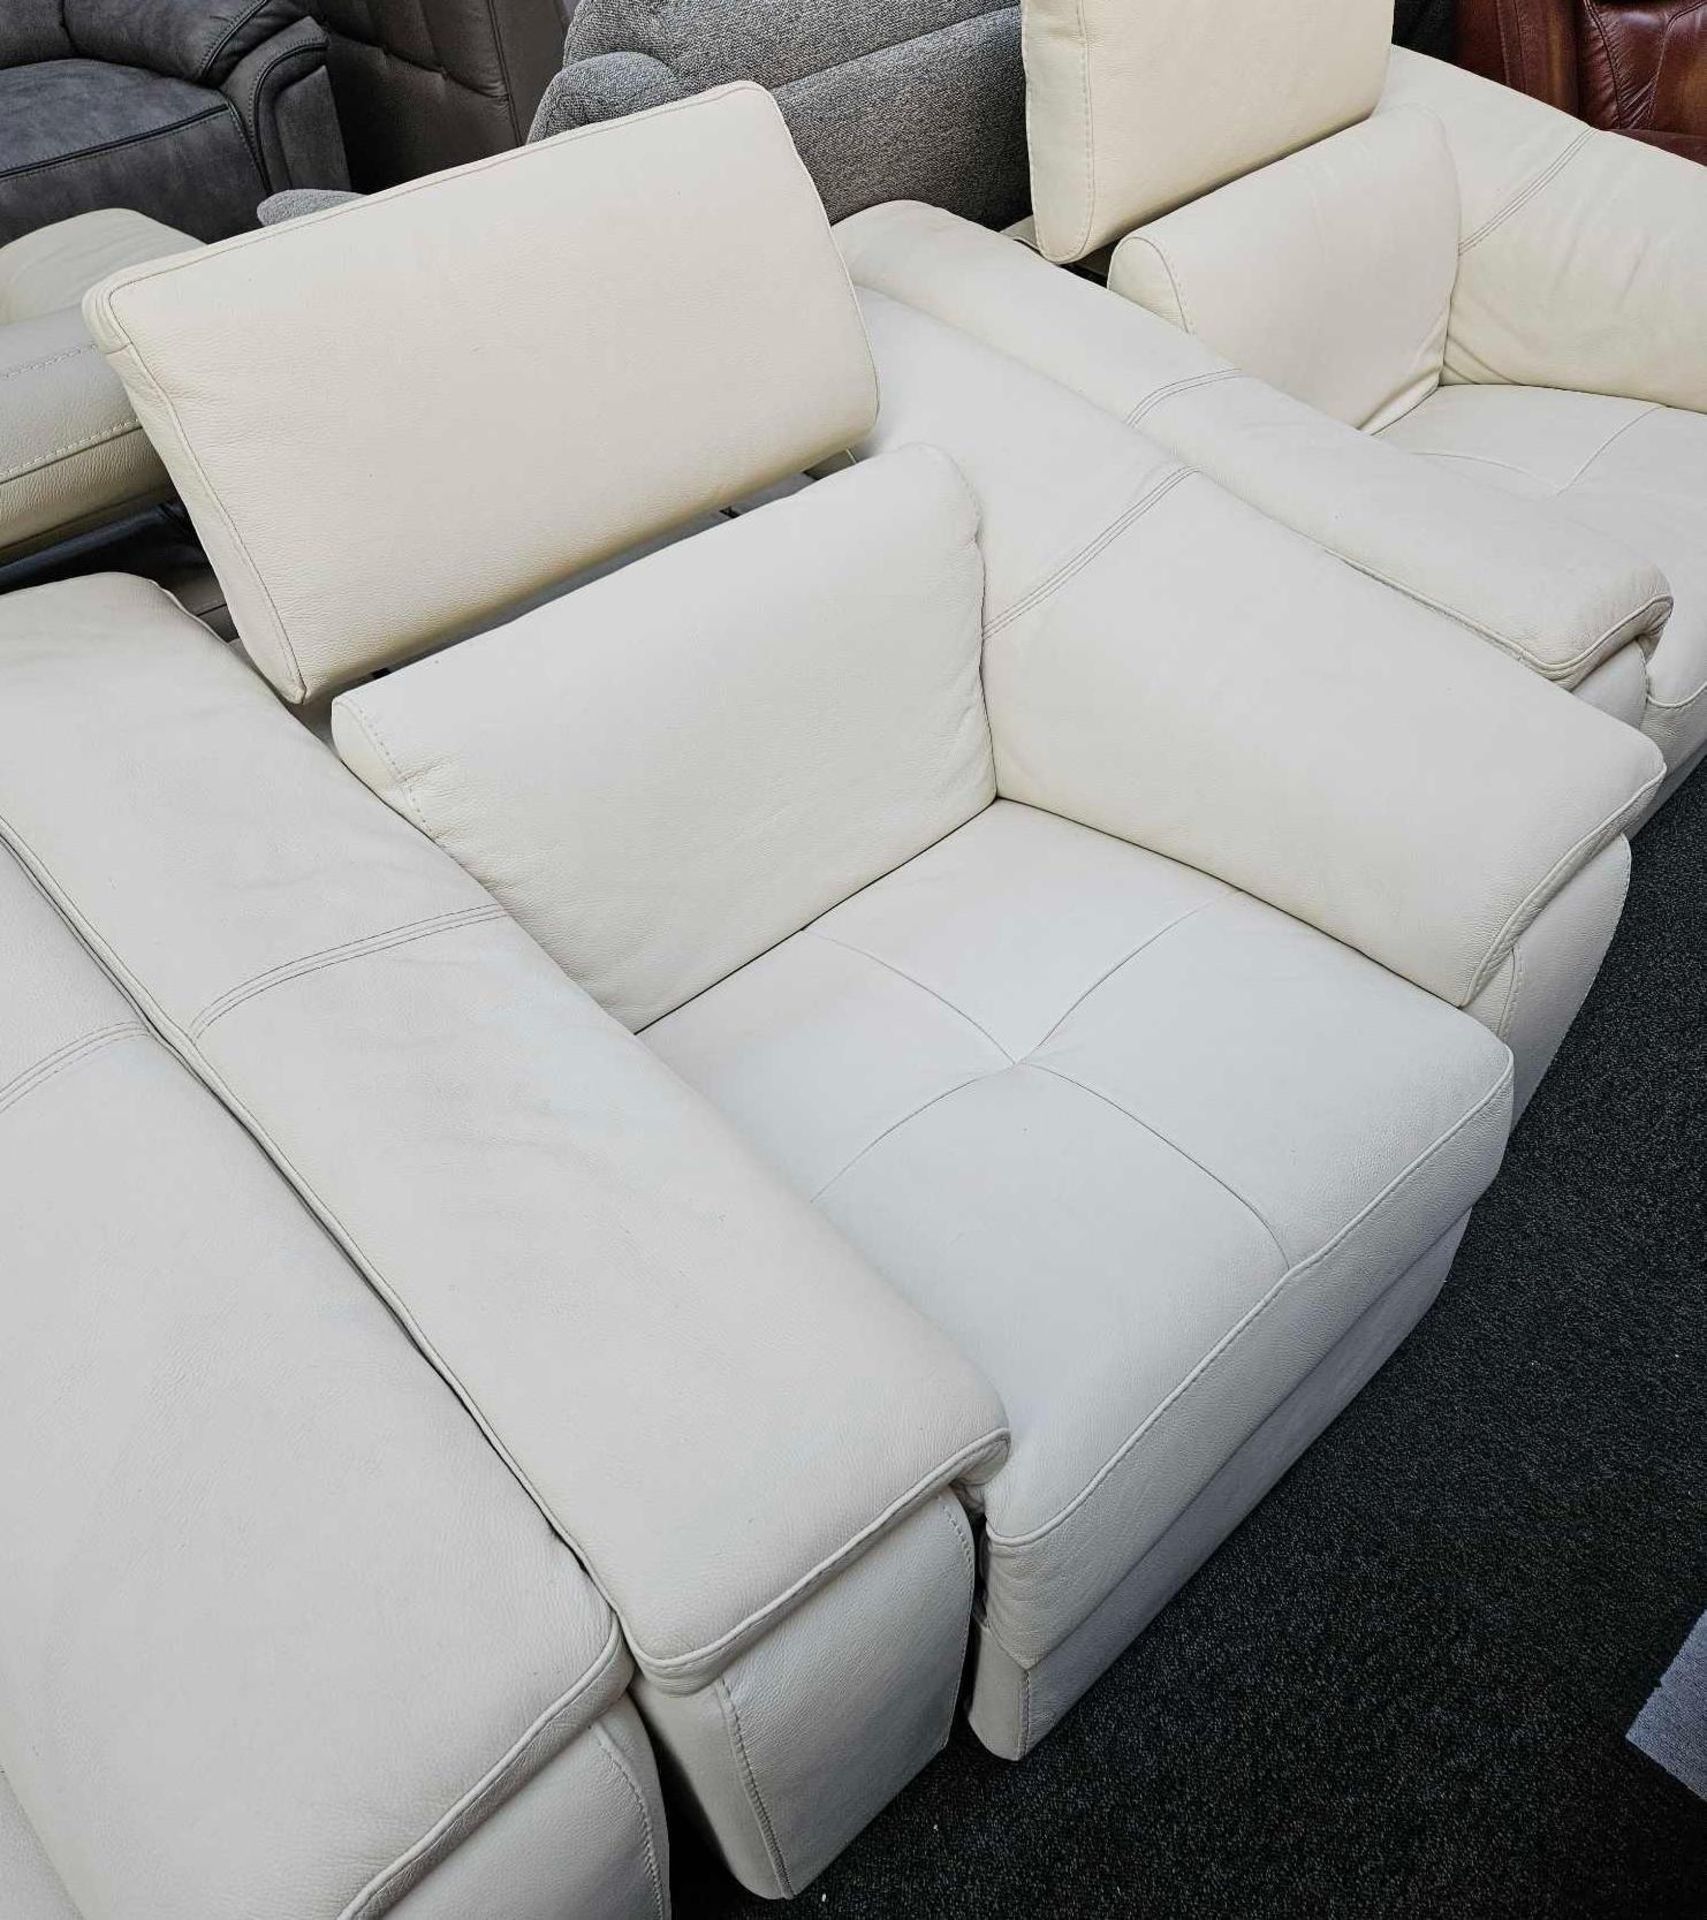 *EX DISPLAY* Nicolette 3 + 1 + 1 sofa with power reclining headrest and 2 power chairs in cream. - Image 3 of 4